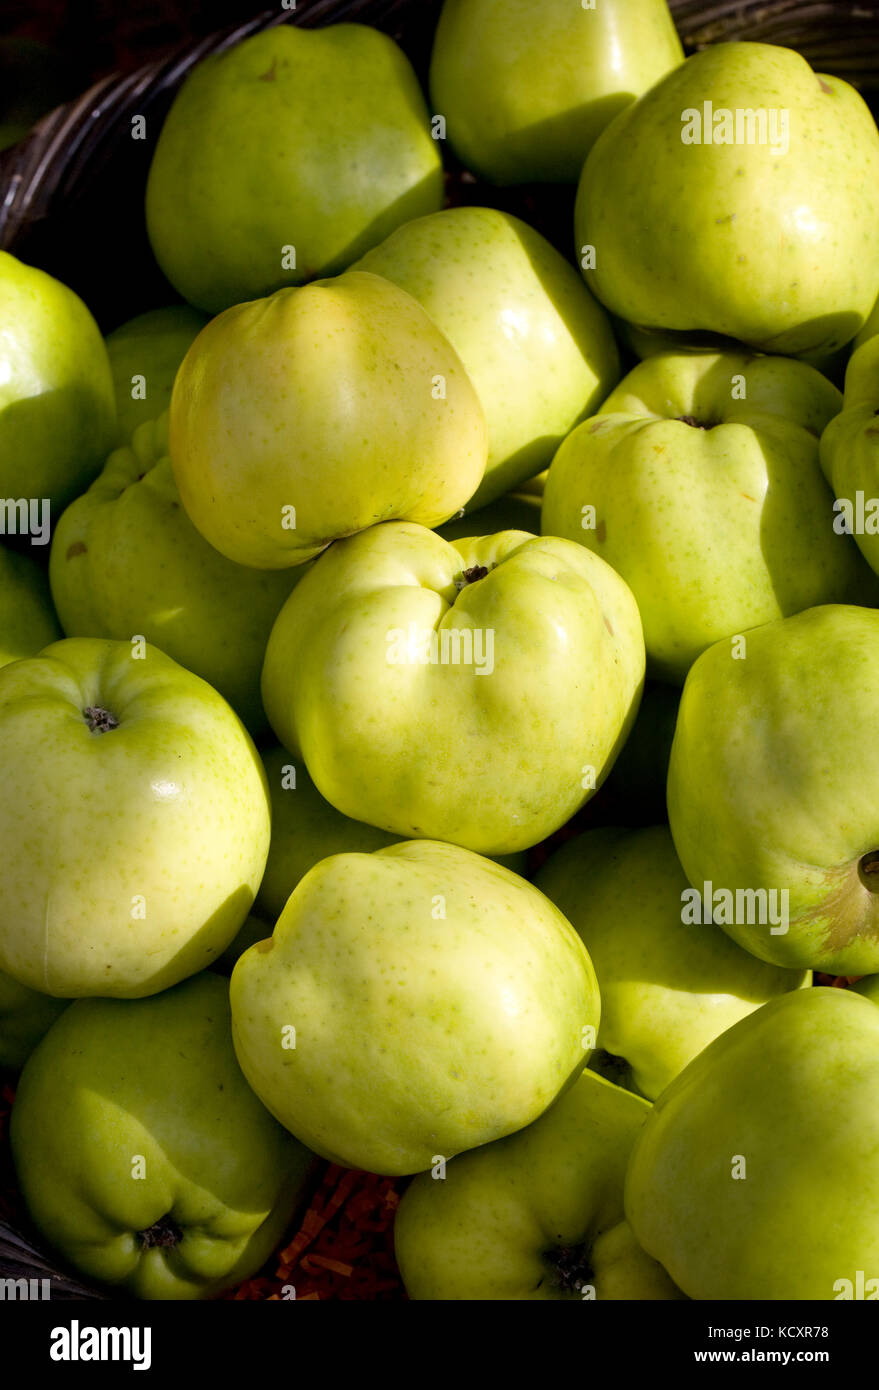 Apple Harvest High Resolution Stock Photography and Images - Alamy